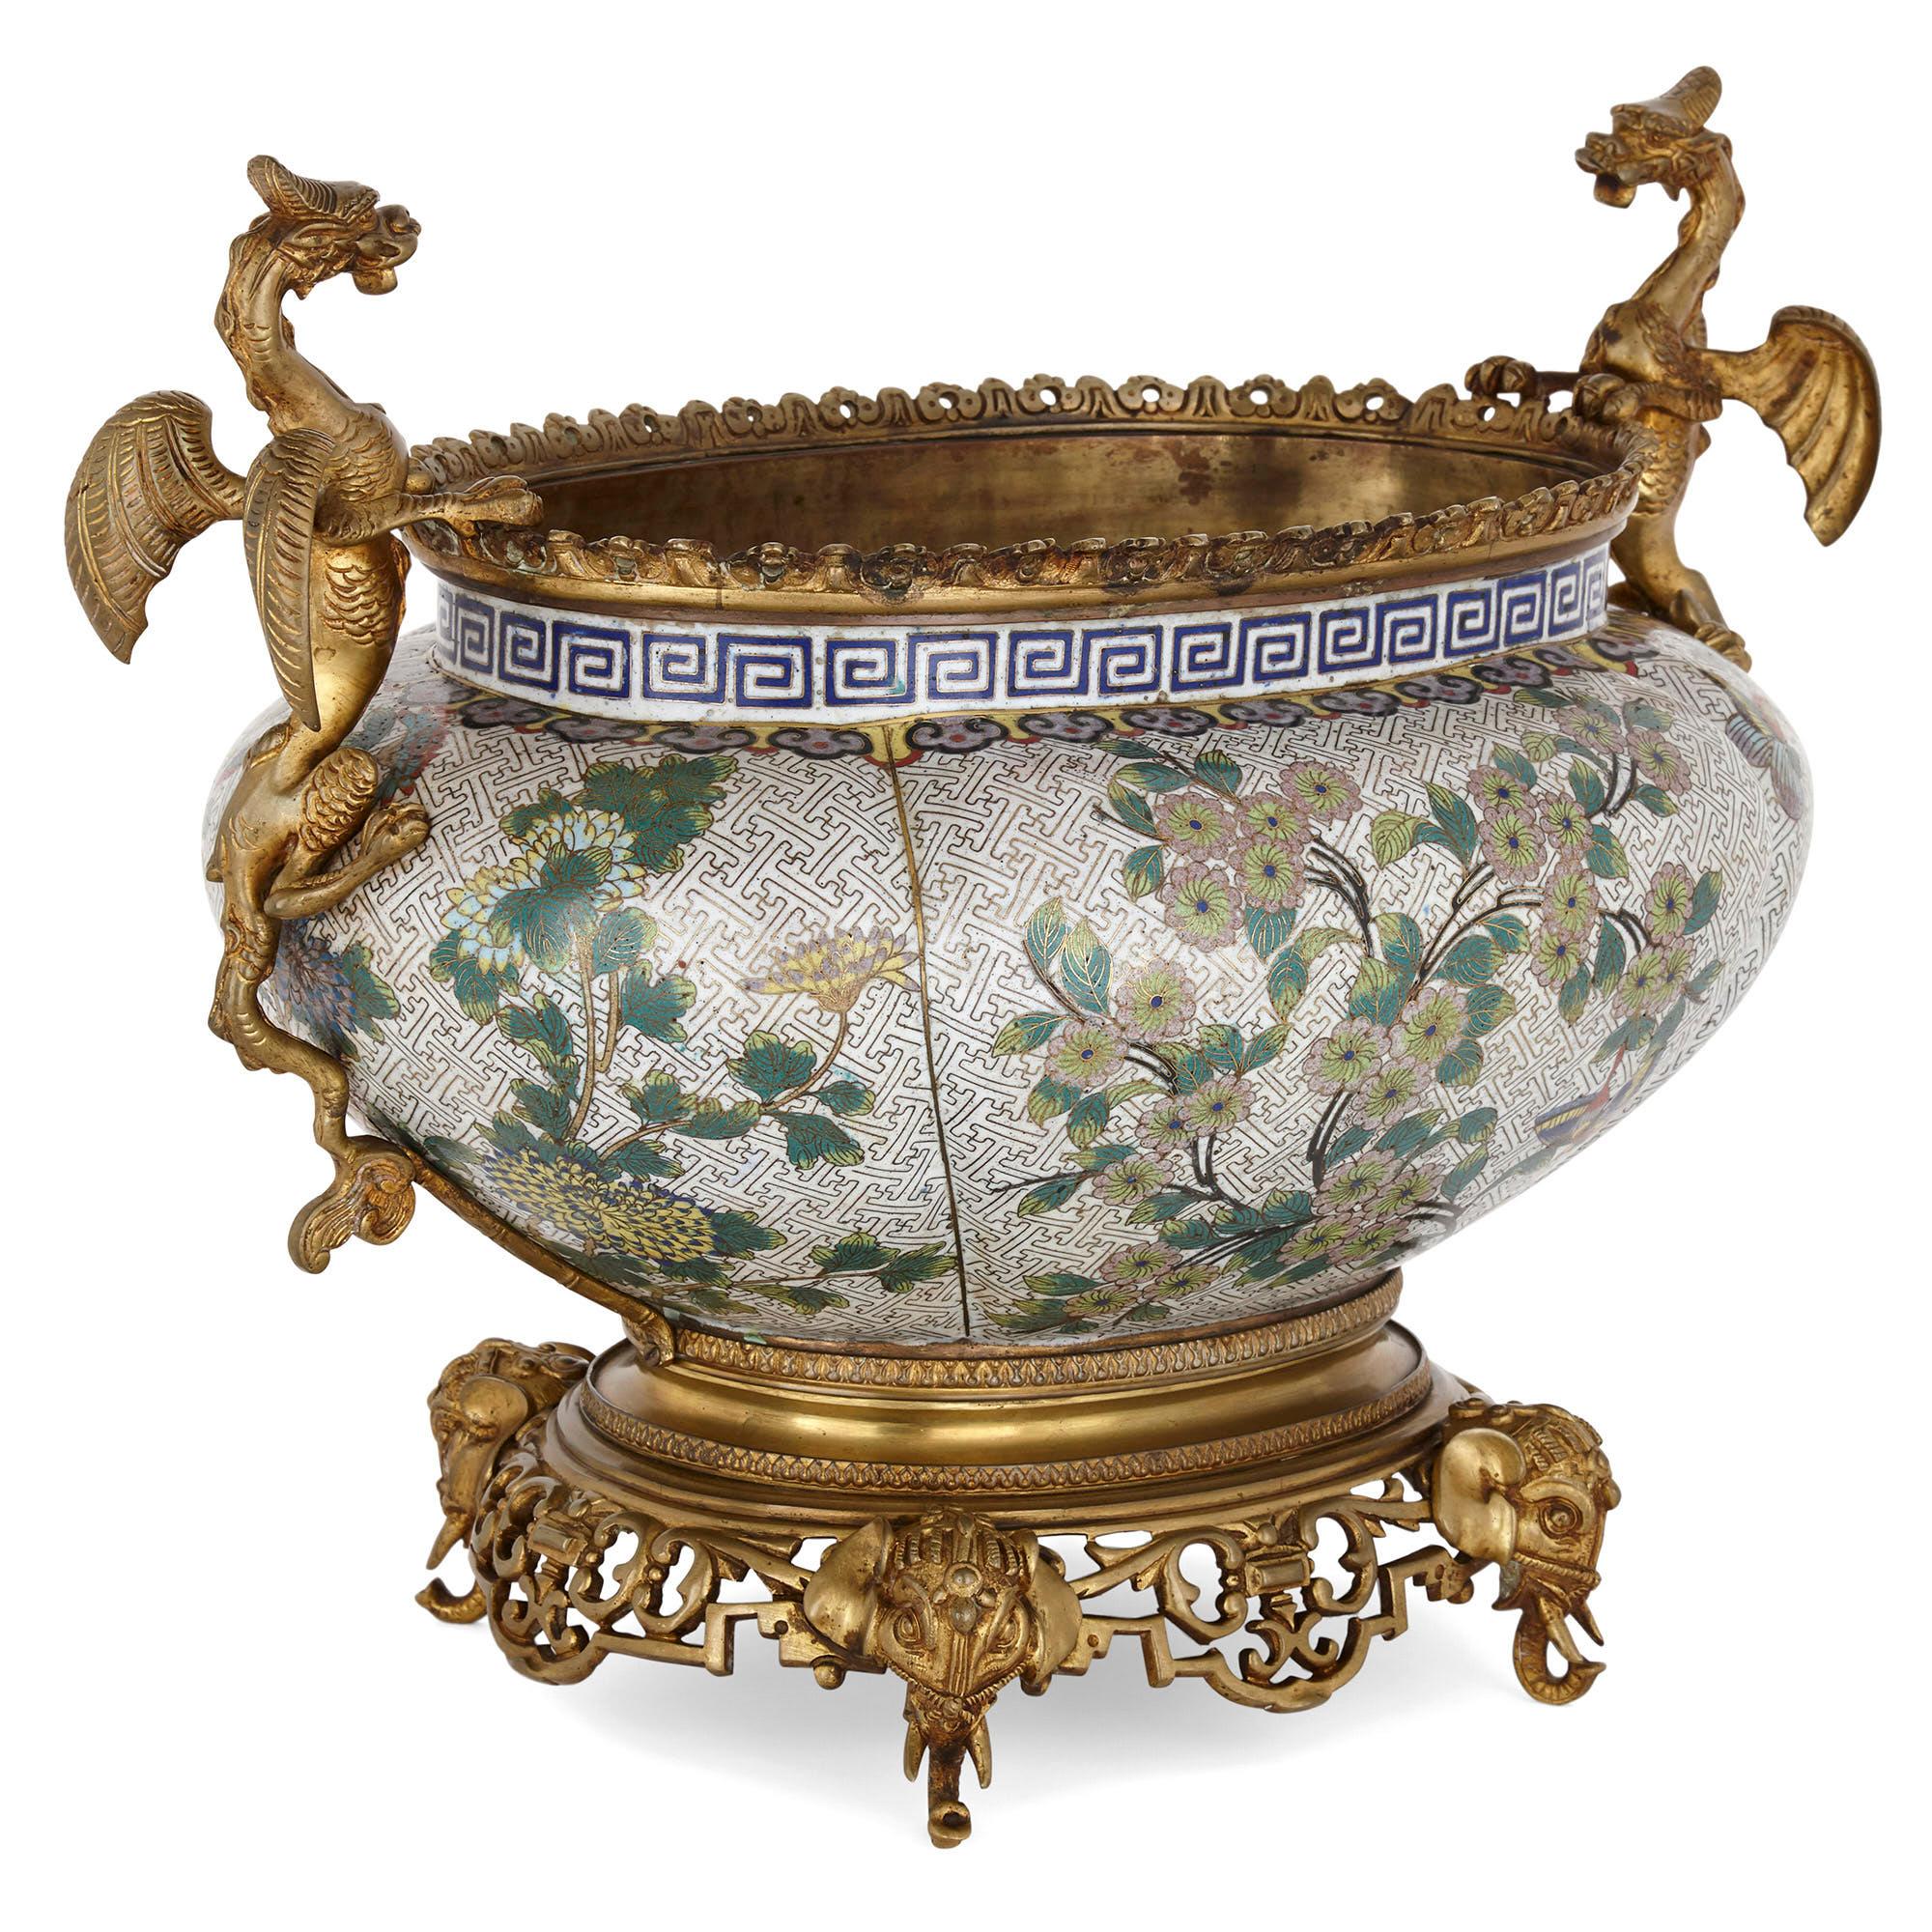 This exquisite cloisonné enamel jardinière was created in China in the 19th century, then exported to France, where it was mounted with gilt bronze elements. The piece speaks of the rich history of cultural exchange between the Far East and Europe.